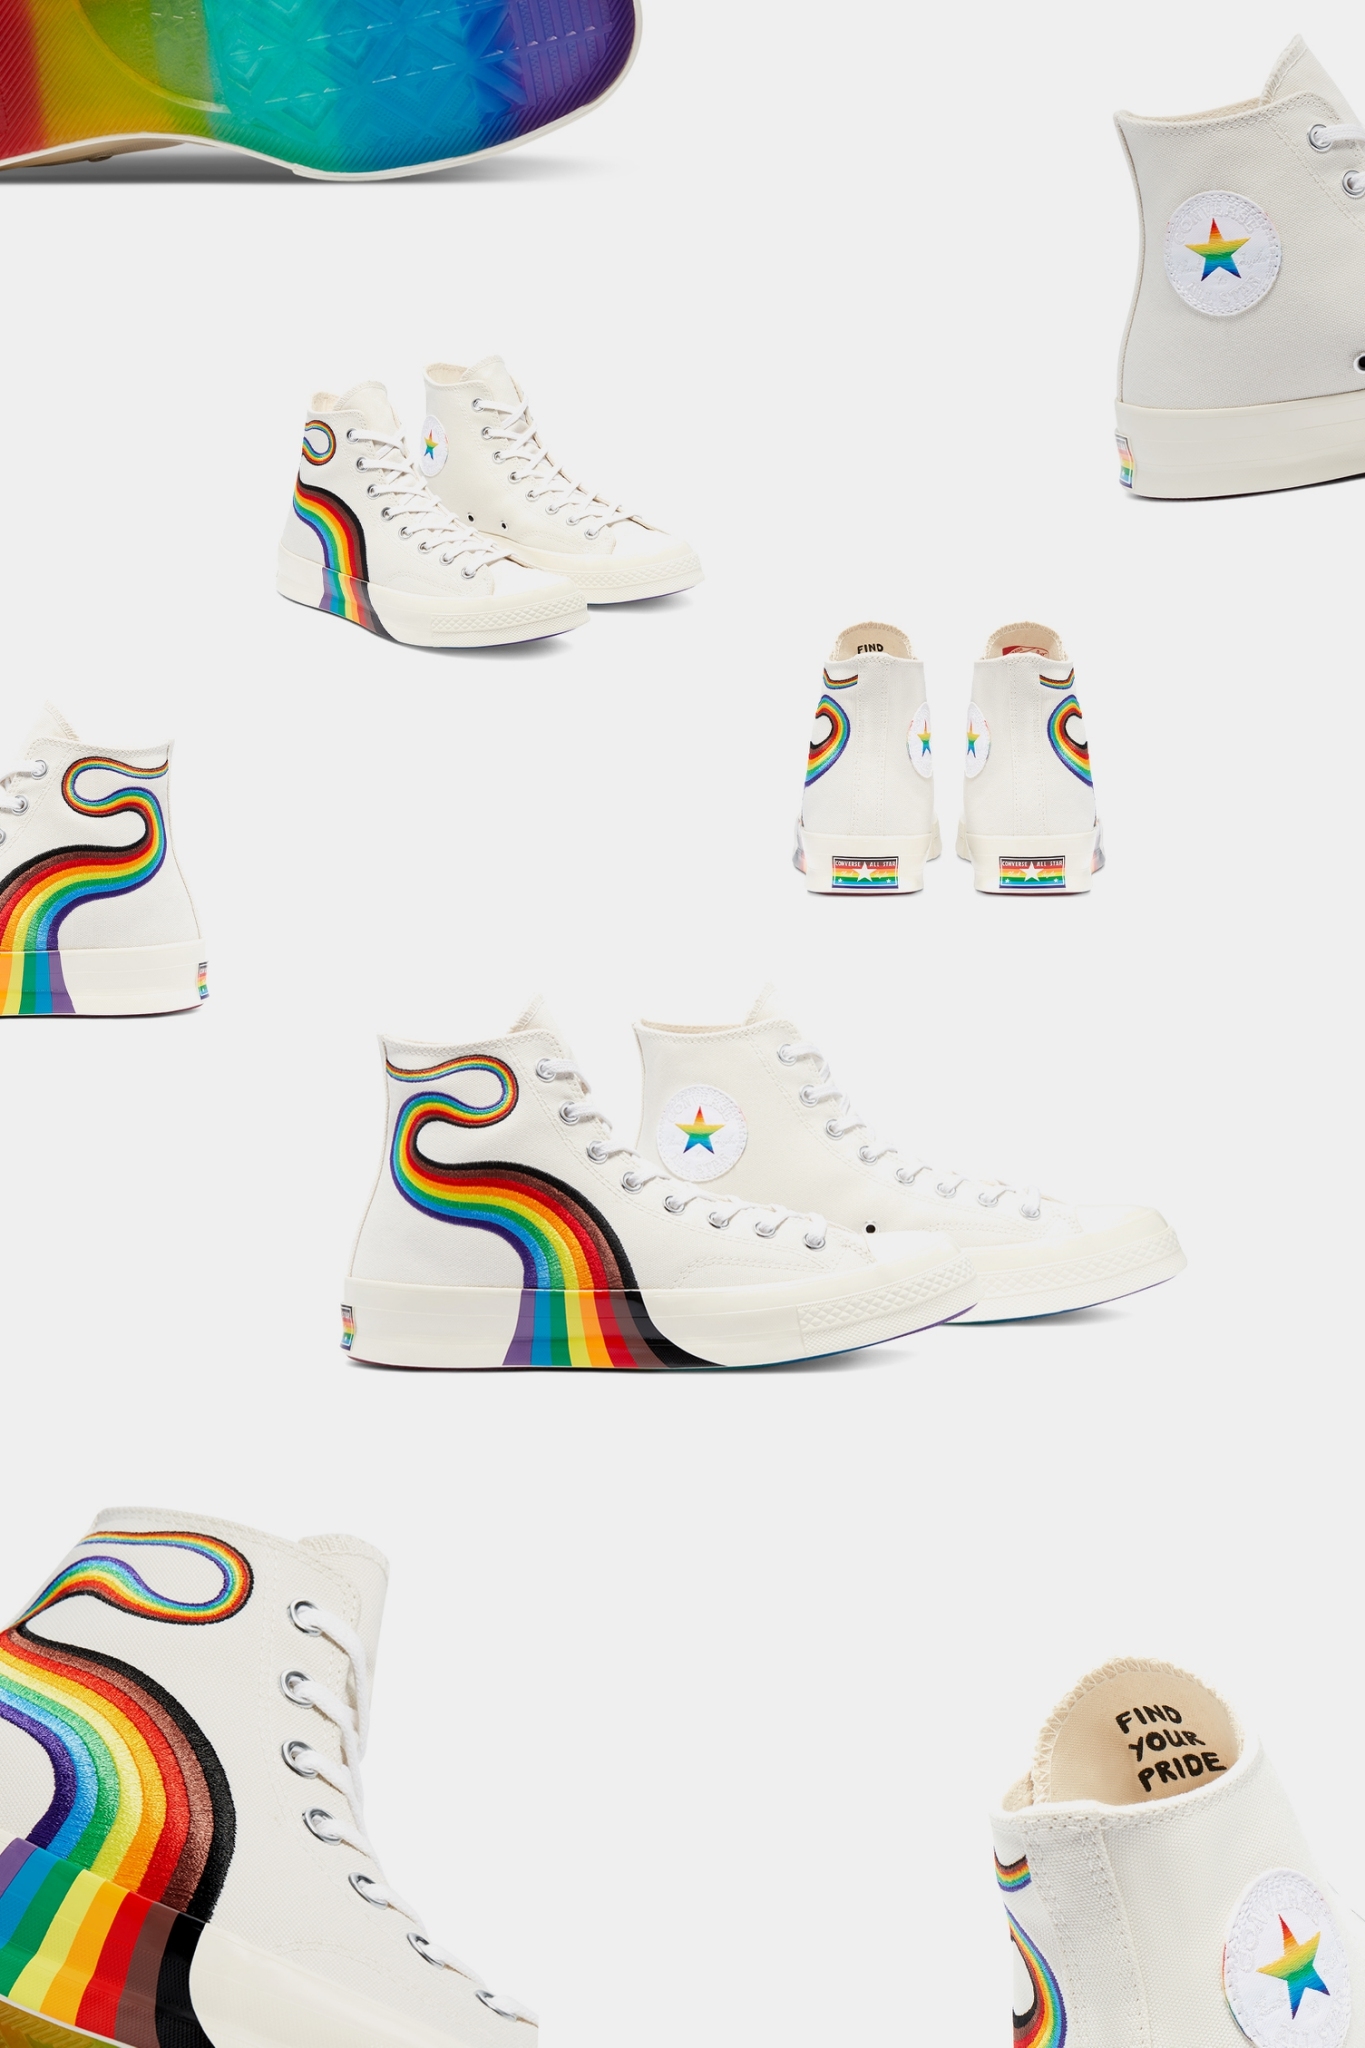 NEW ARRIVAL : 🌈 𝗖𝗢𝗡𝗩𝗘𝗥𝗦𝗘 𝗣𝗥𝗜𝗗𝗘